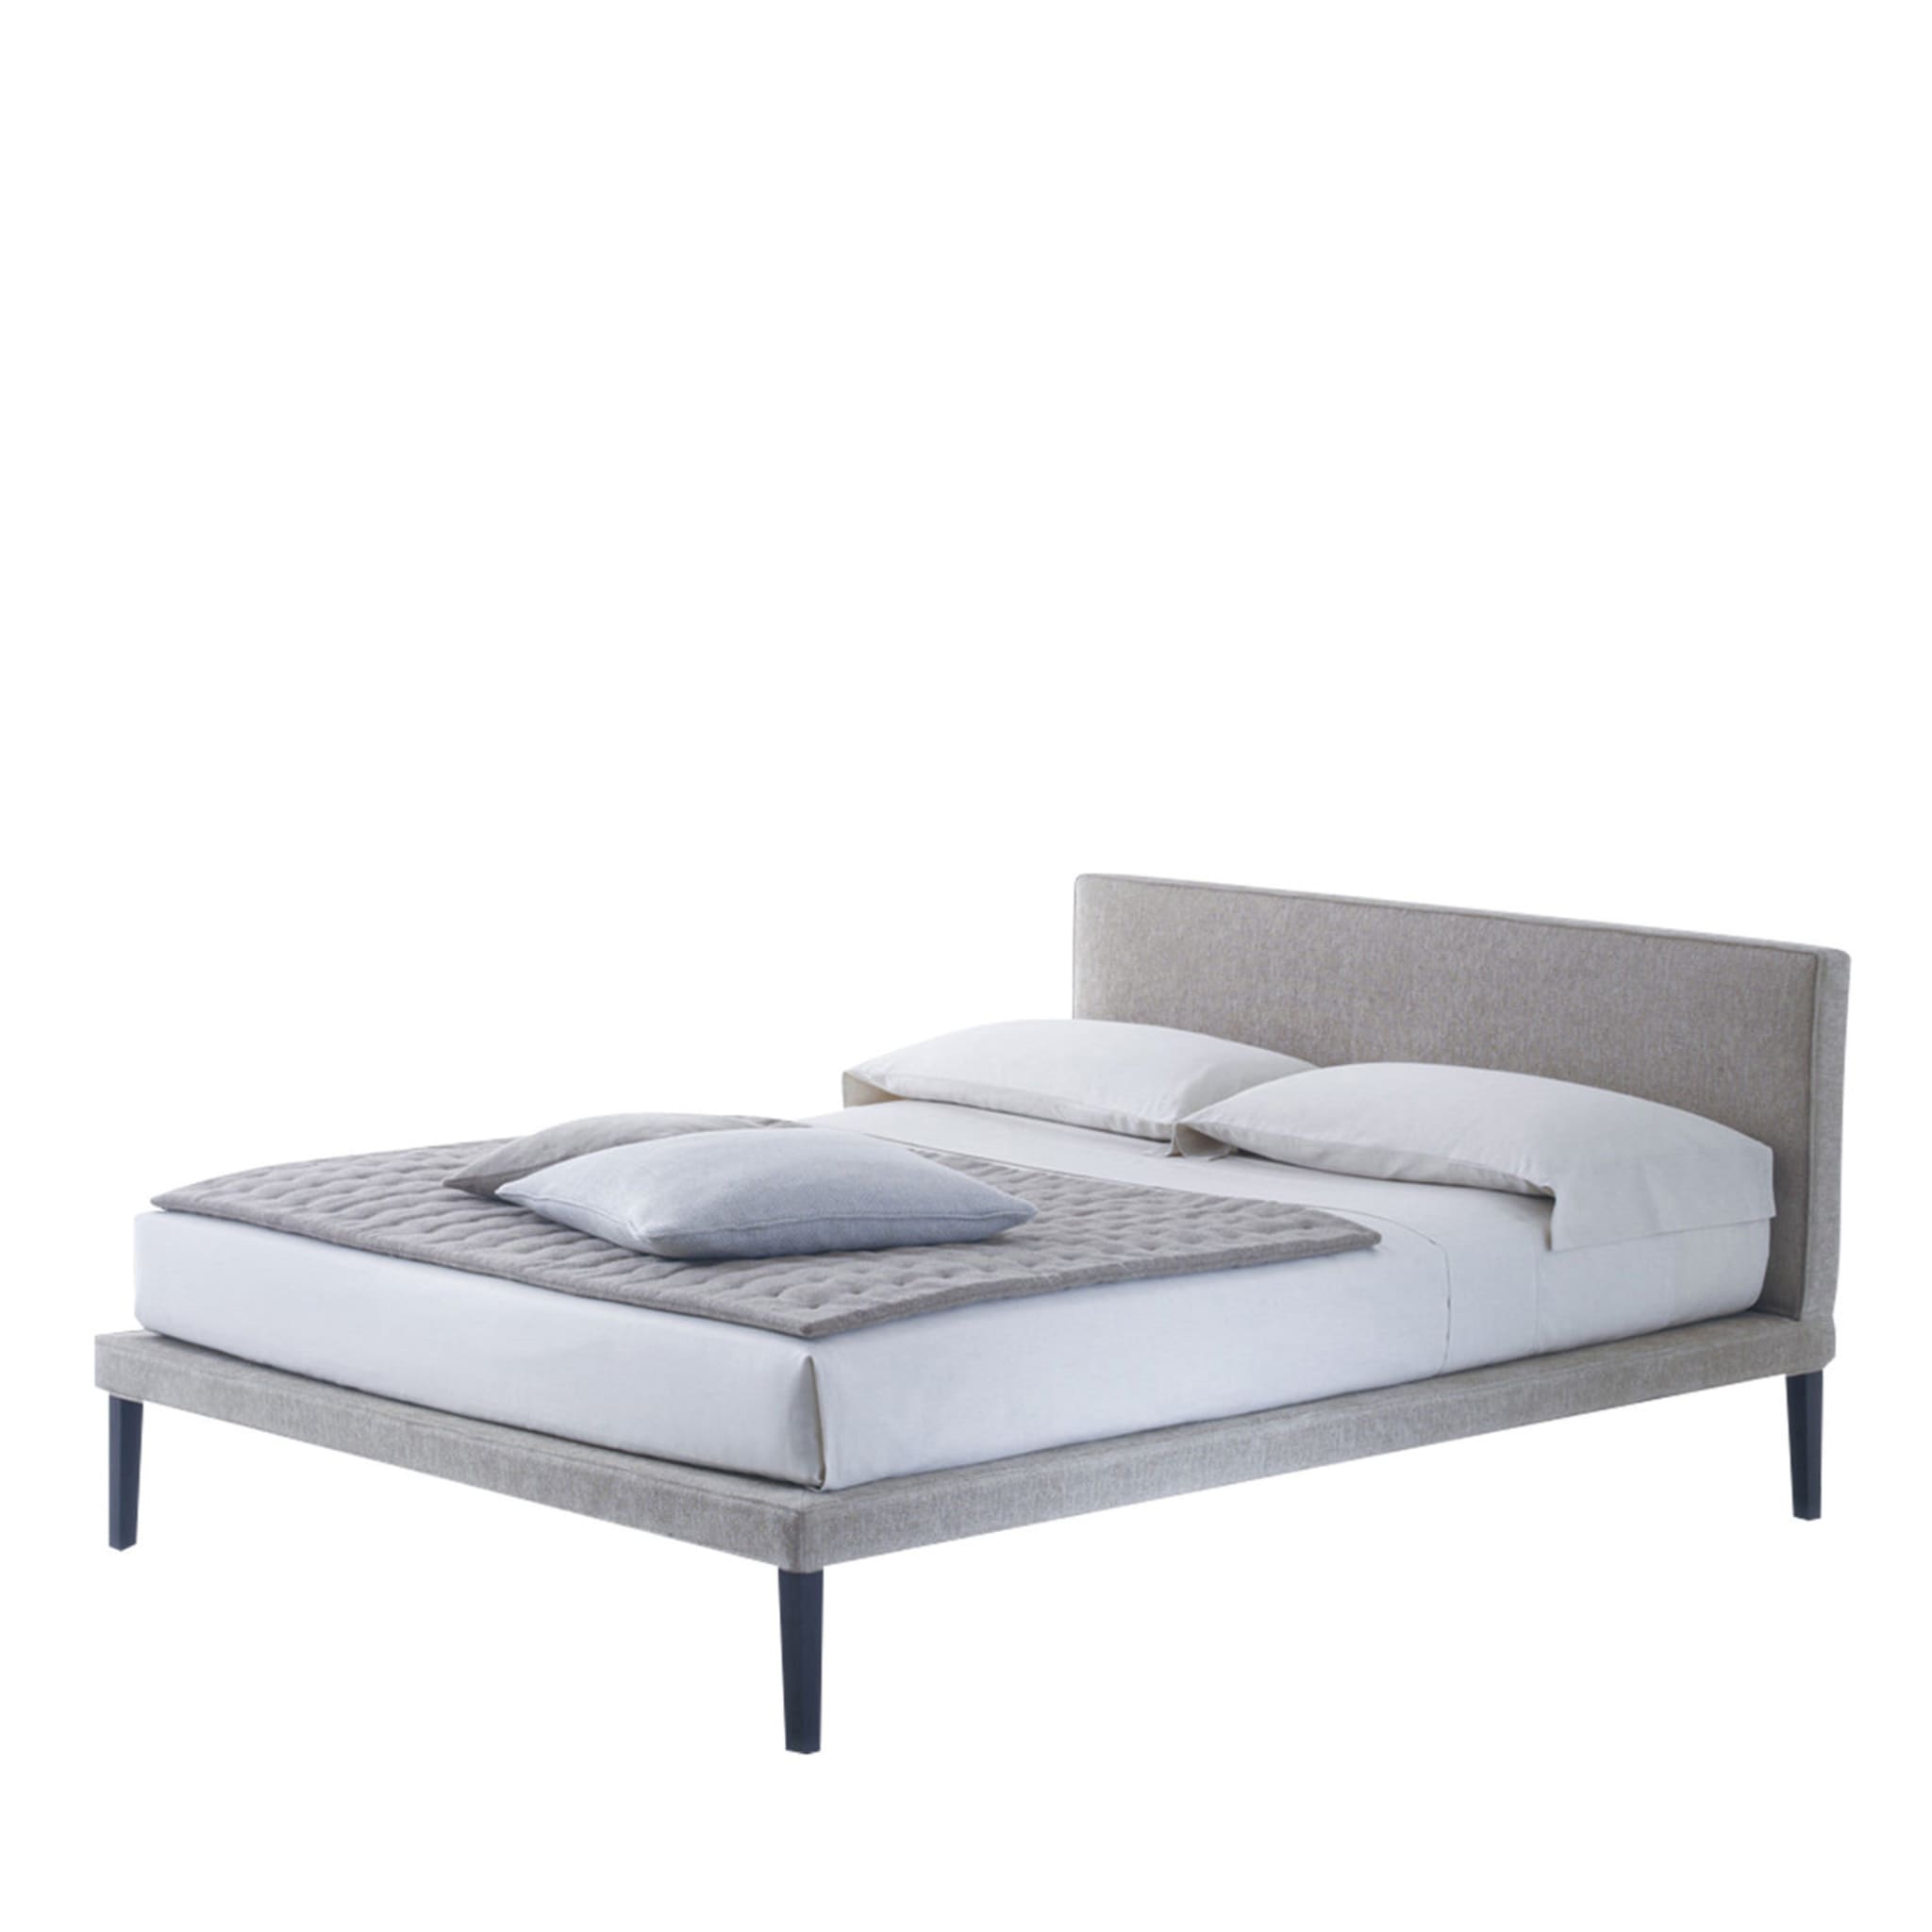 Ebridi Tessile Bedframe by StH - Main view